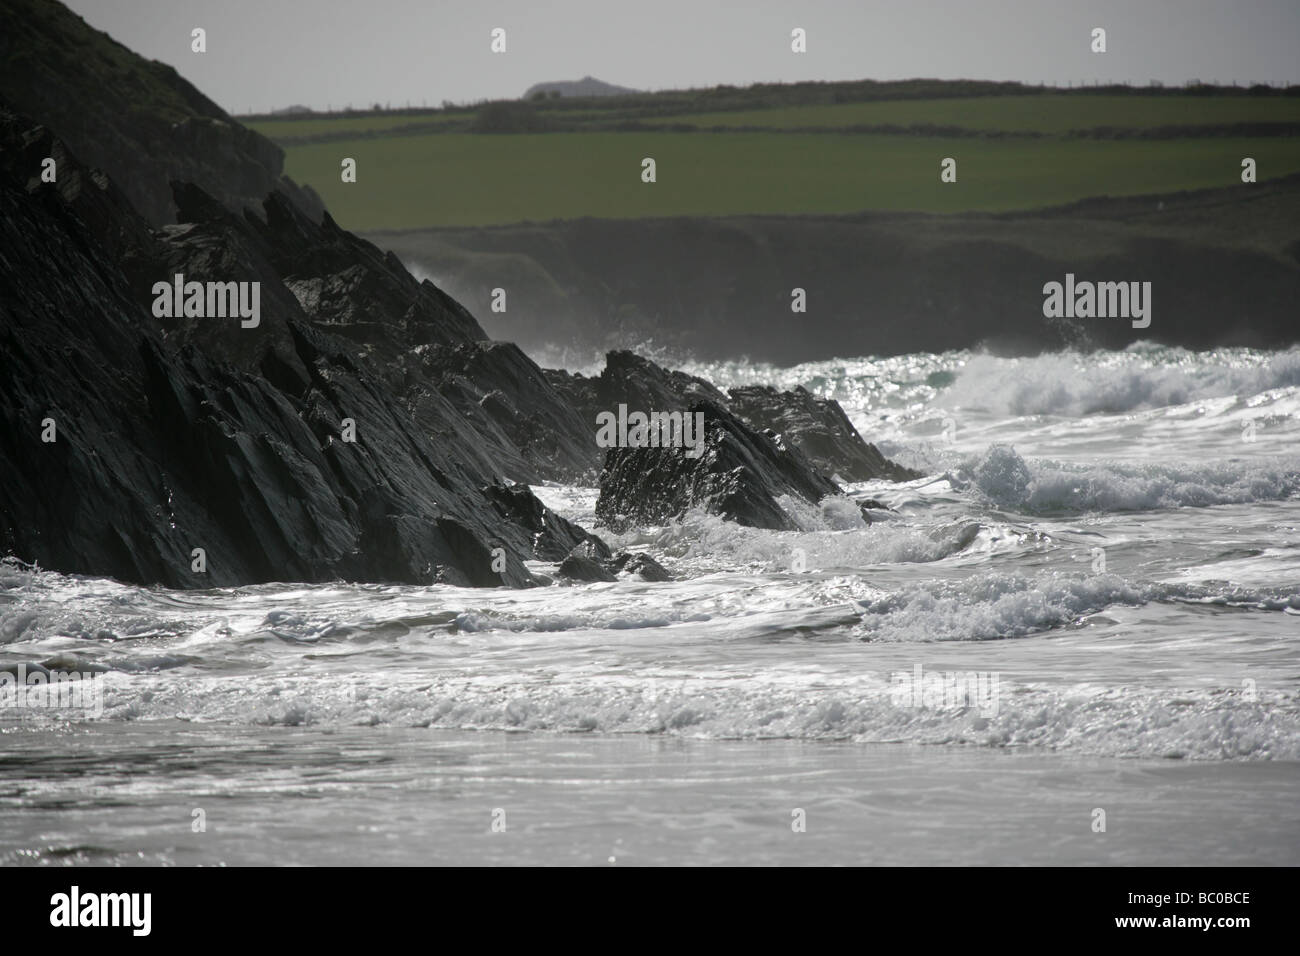 Area of Whitesands Bay, Wales. Semi silhouetted view from Whitesands Bay of the Pembrokeshire coastline, during rough weather. Stock Photo